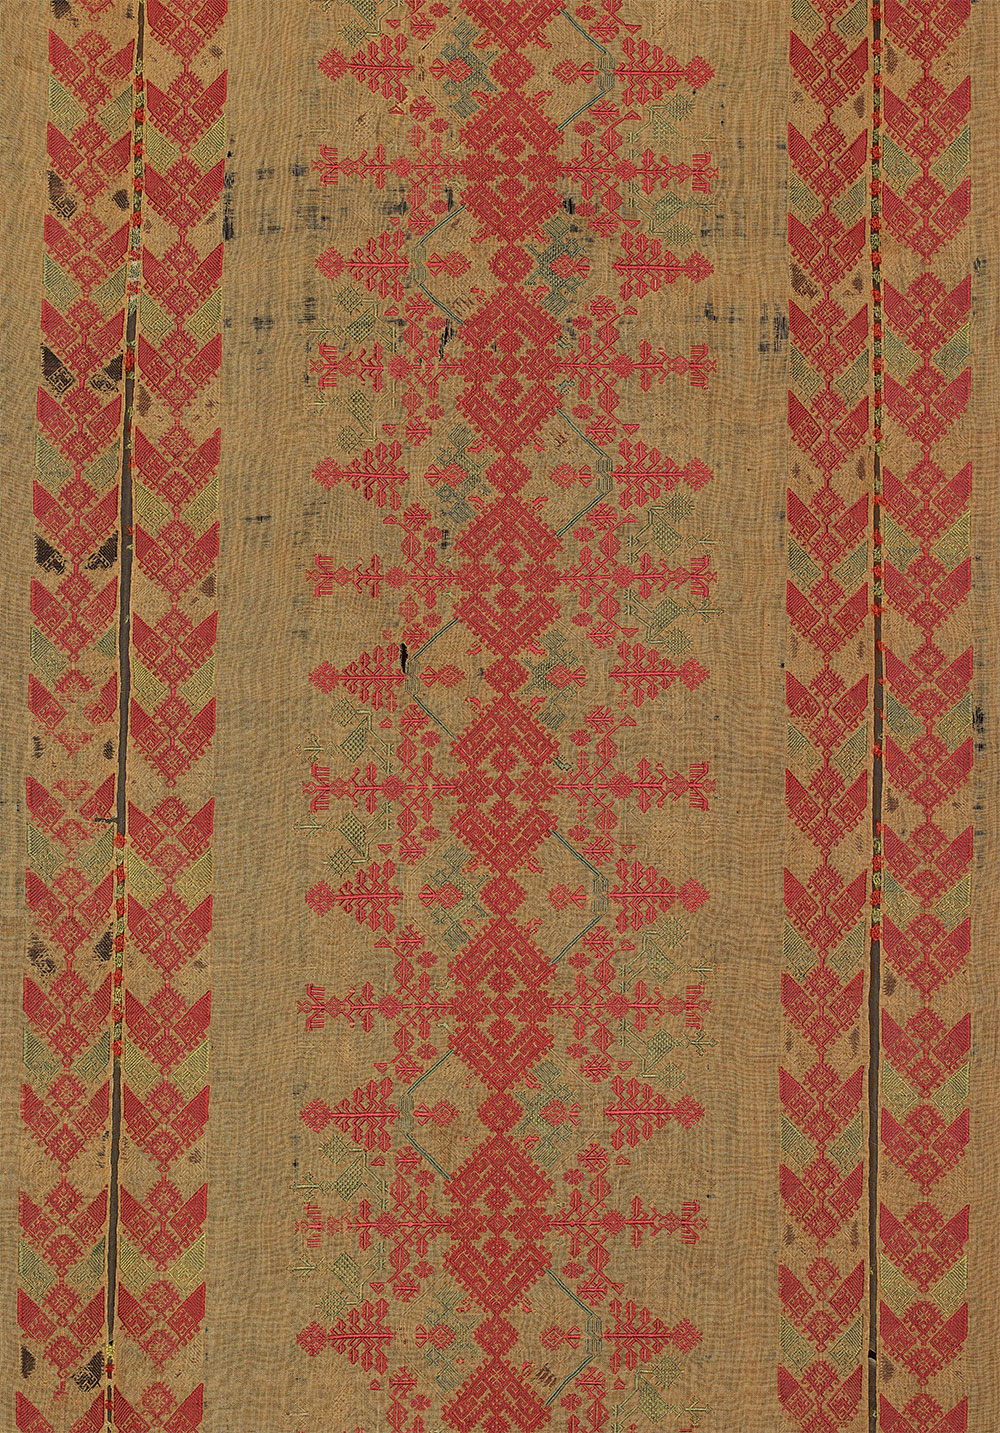 (1) Bed curtain (detail), Cyclades, 17th to 18th century. Silk on linen, 1.44 x 2.93 m (4' 9" x 9' 7"). Ashmolean Museum of Art and Archaeology, University of Oxford, EA1978.105a, Presented by John Buxton, 1978